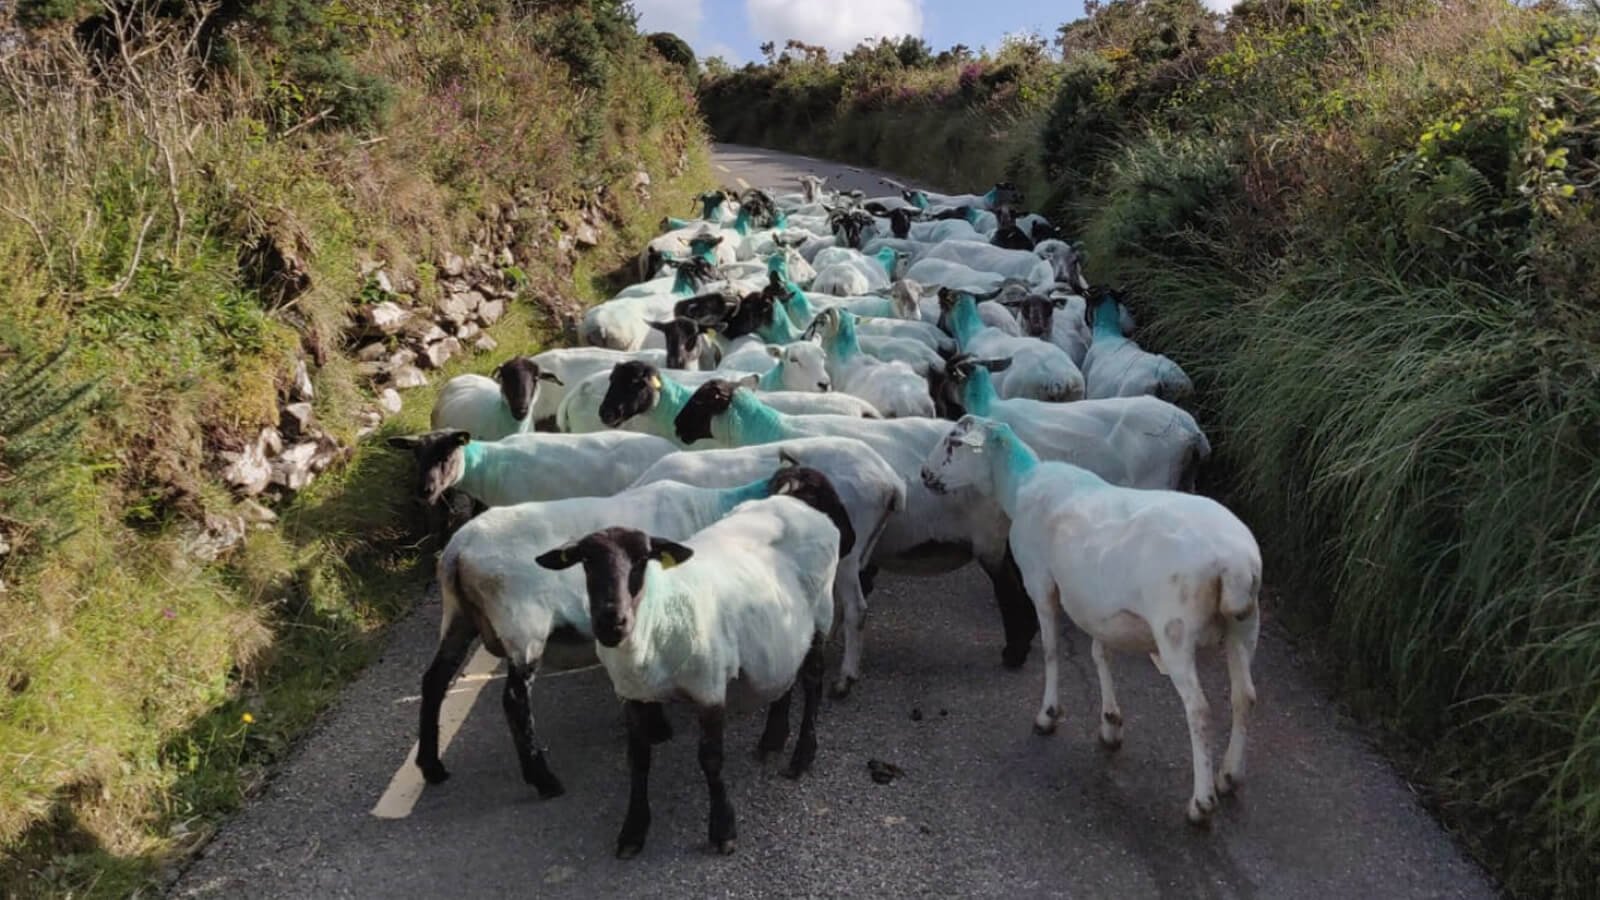 Sheep on a road in Ireland